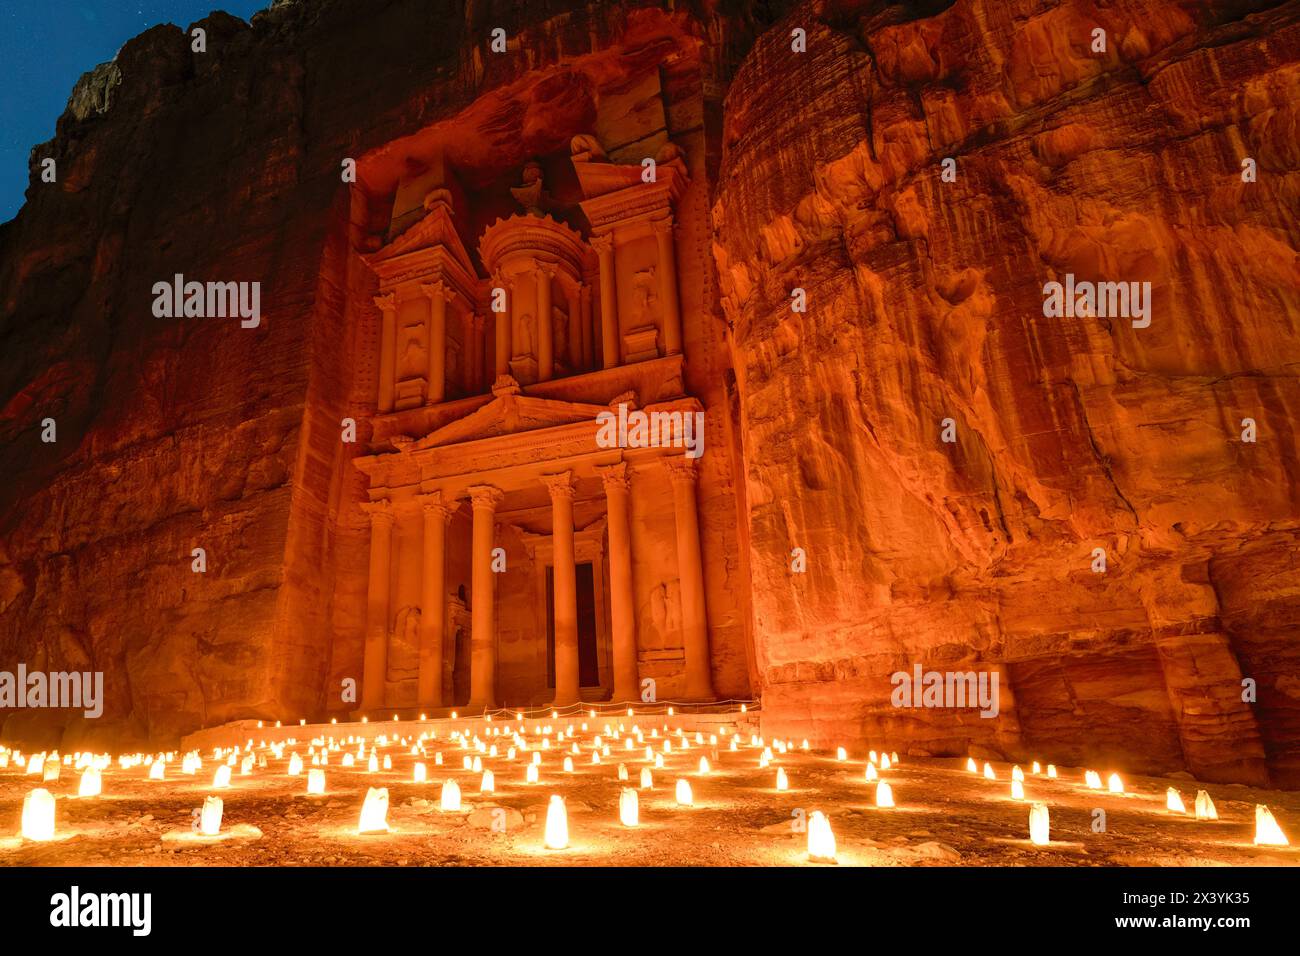 The Treasury in Petra, Jordan lit up with candles Stock Photo